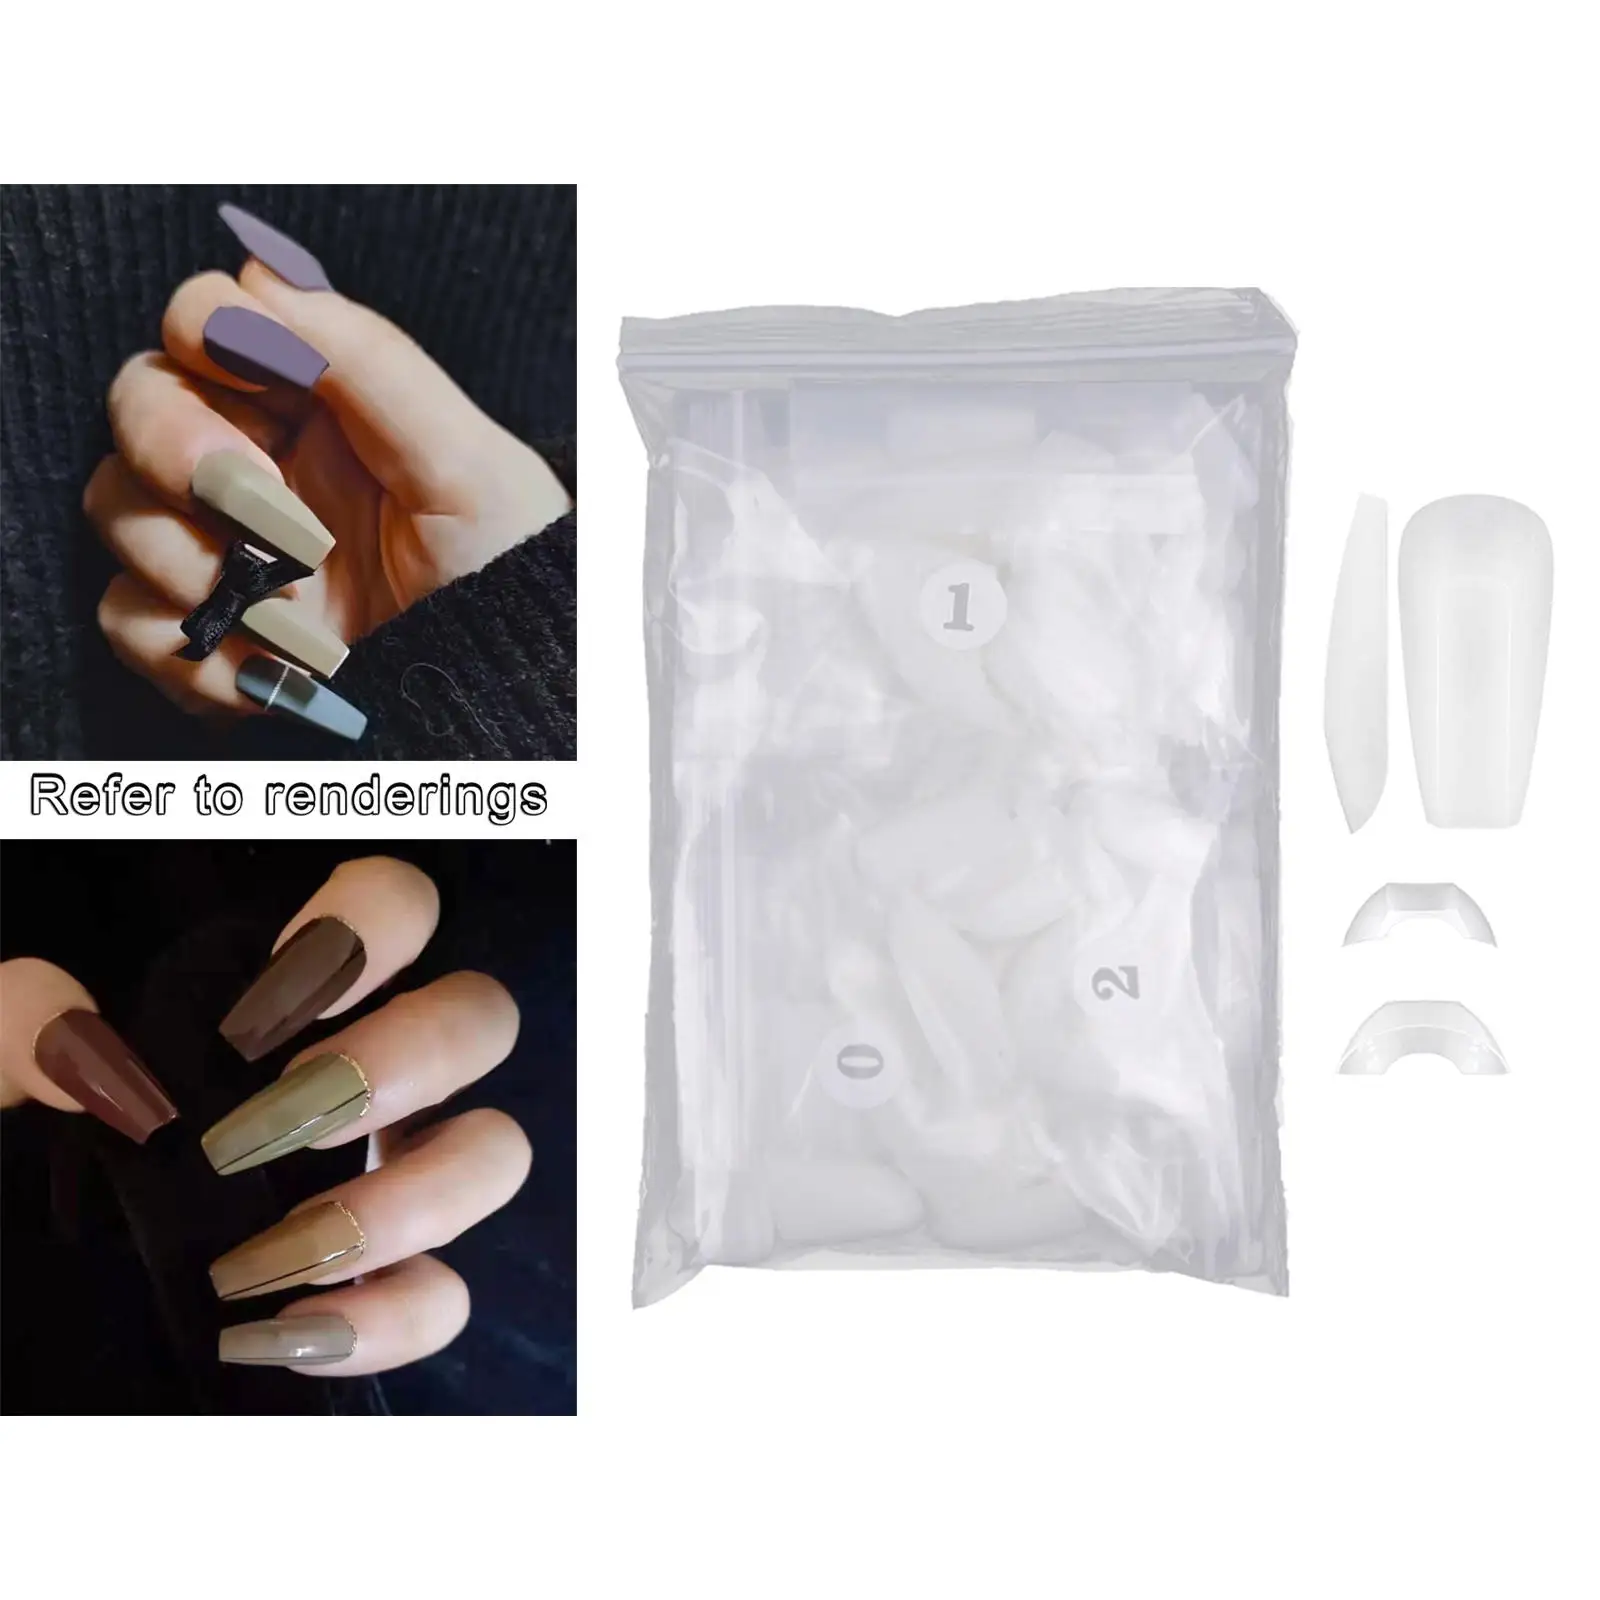 504x False Nail Tips Simple Operation Manicure Nail Care Artificial Portable for Parties Weddings Appointments Lady Girls